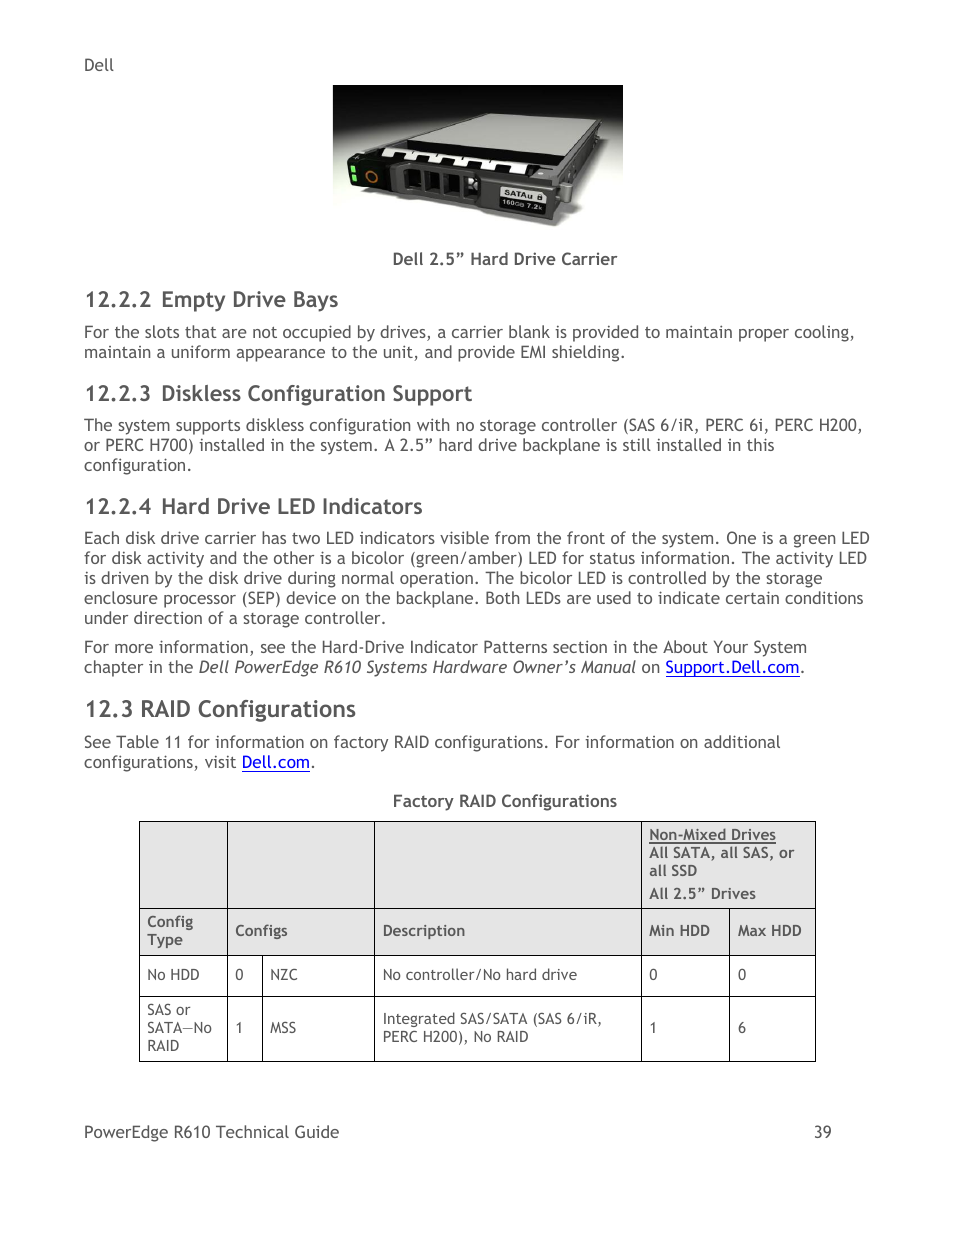 Empty drive bays, Diskless configuration support, Hard drive led indicators  | Dell POWEREDGE R610 User Manual | Page 39 / 61